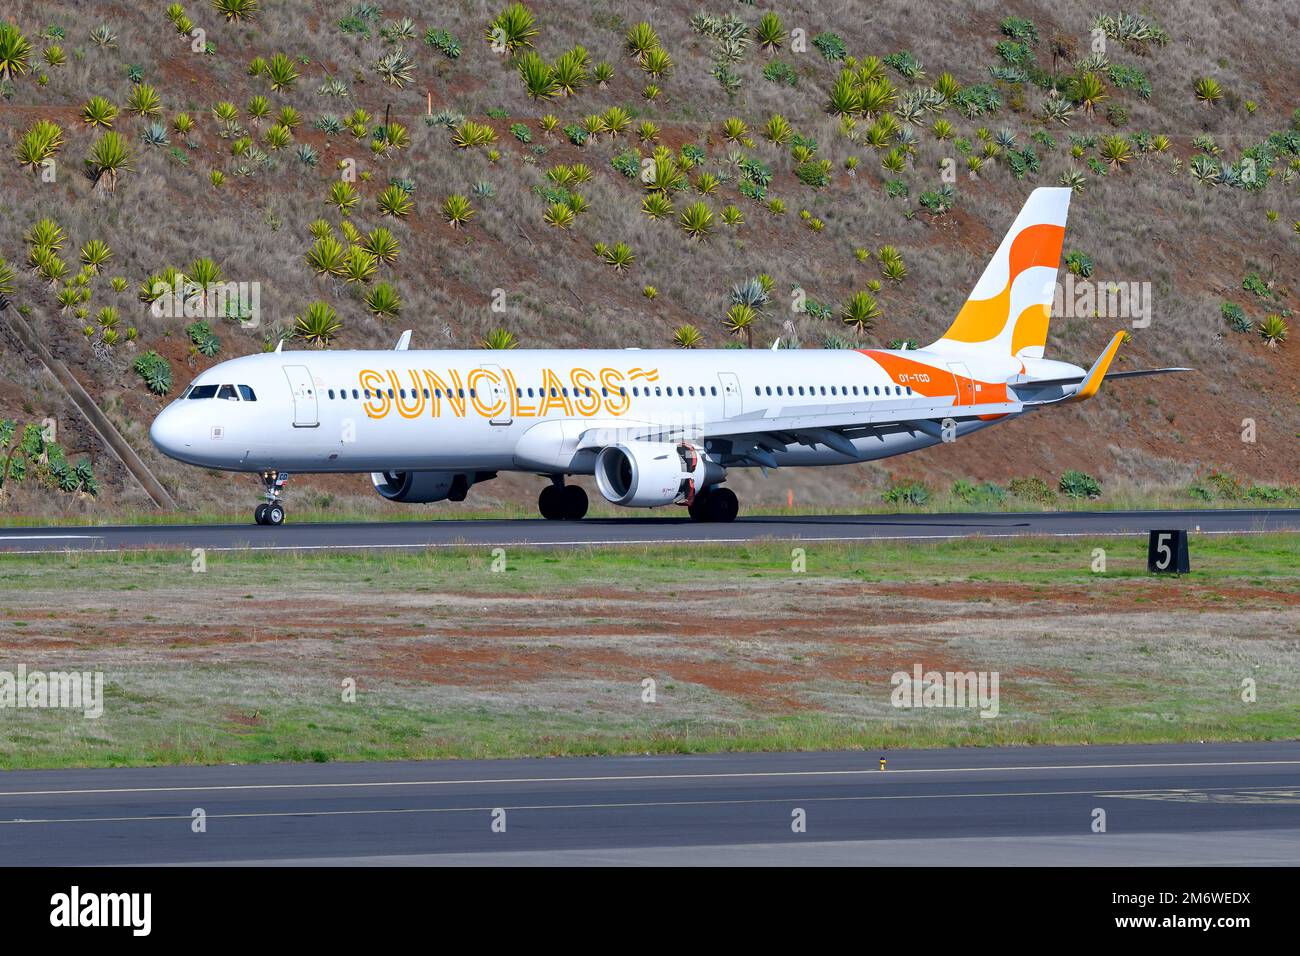 Sunclass Airlines A321 aircraft landing at a holiday destination. Charter SunClass Airline with Airbus A321 airplane. Stock Photo